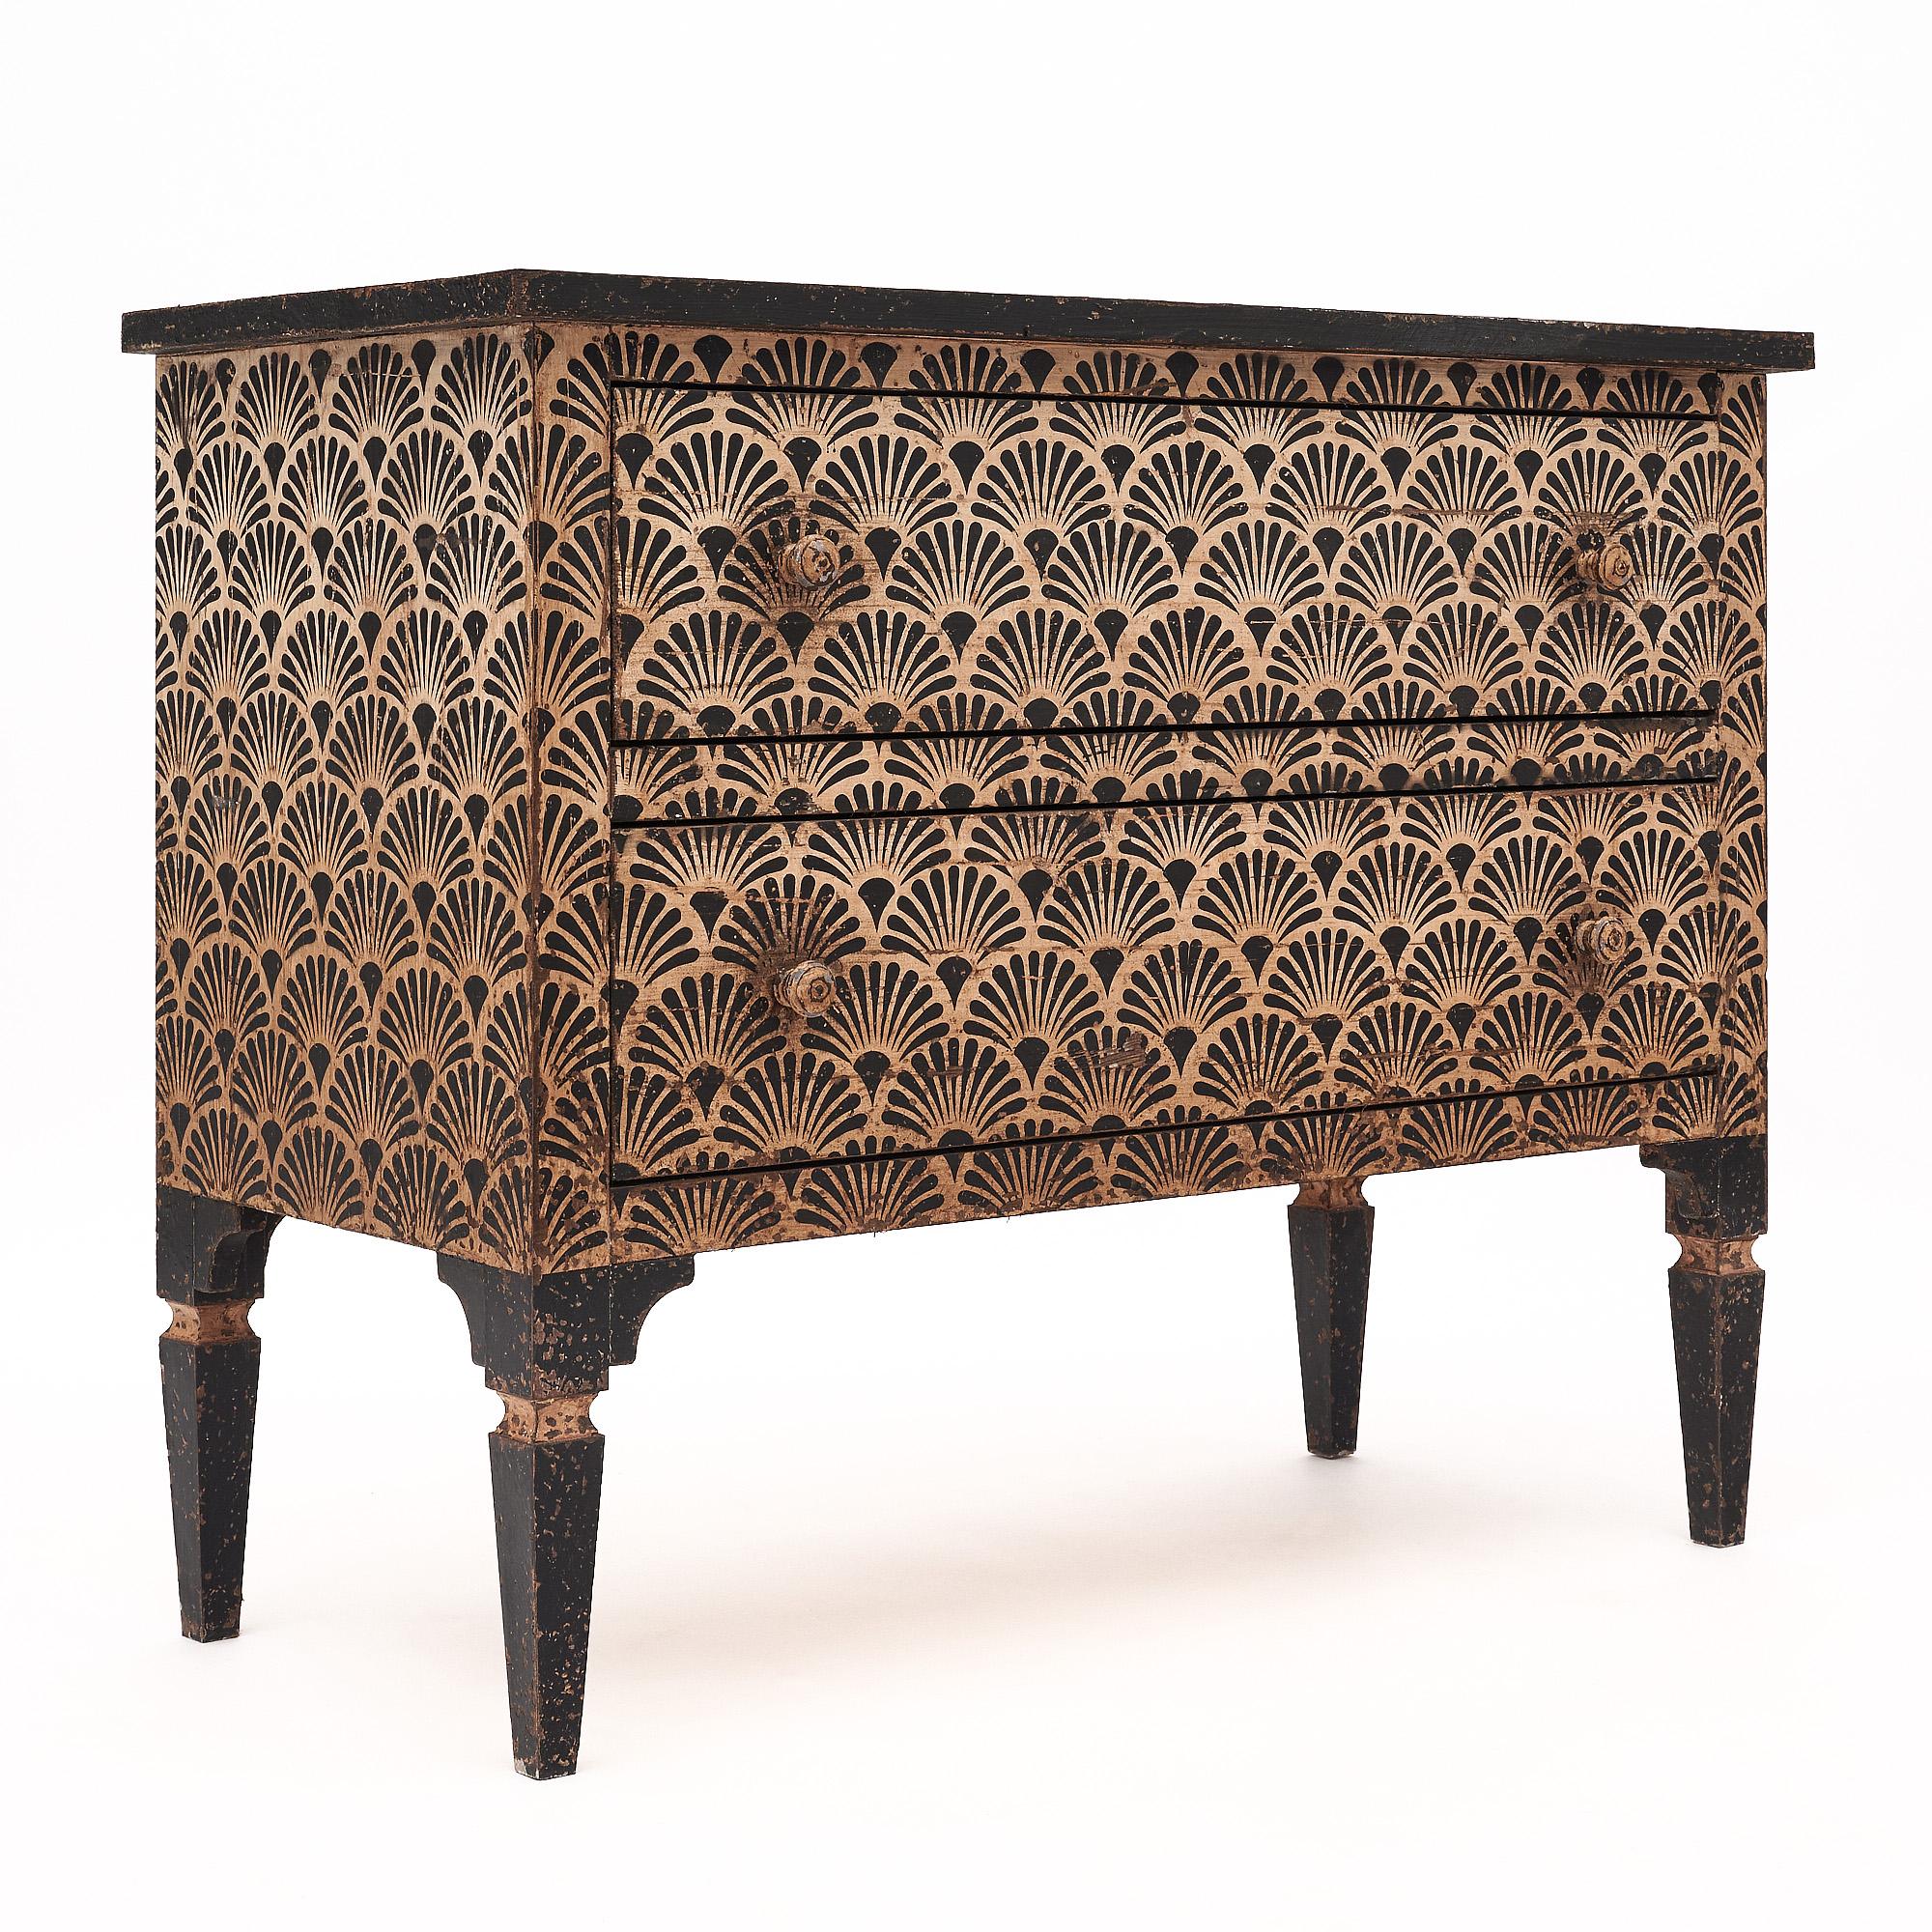 Pair of chests from Italy that feature a striking hand-painted design in cream and black tones showcasing a scalloped design. The chests are supported by four tapered legs and have two dovetailed drawers each.